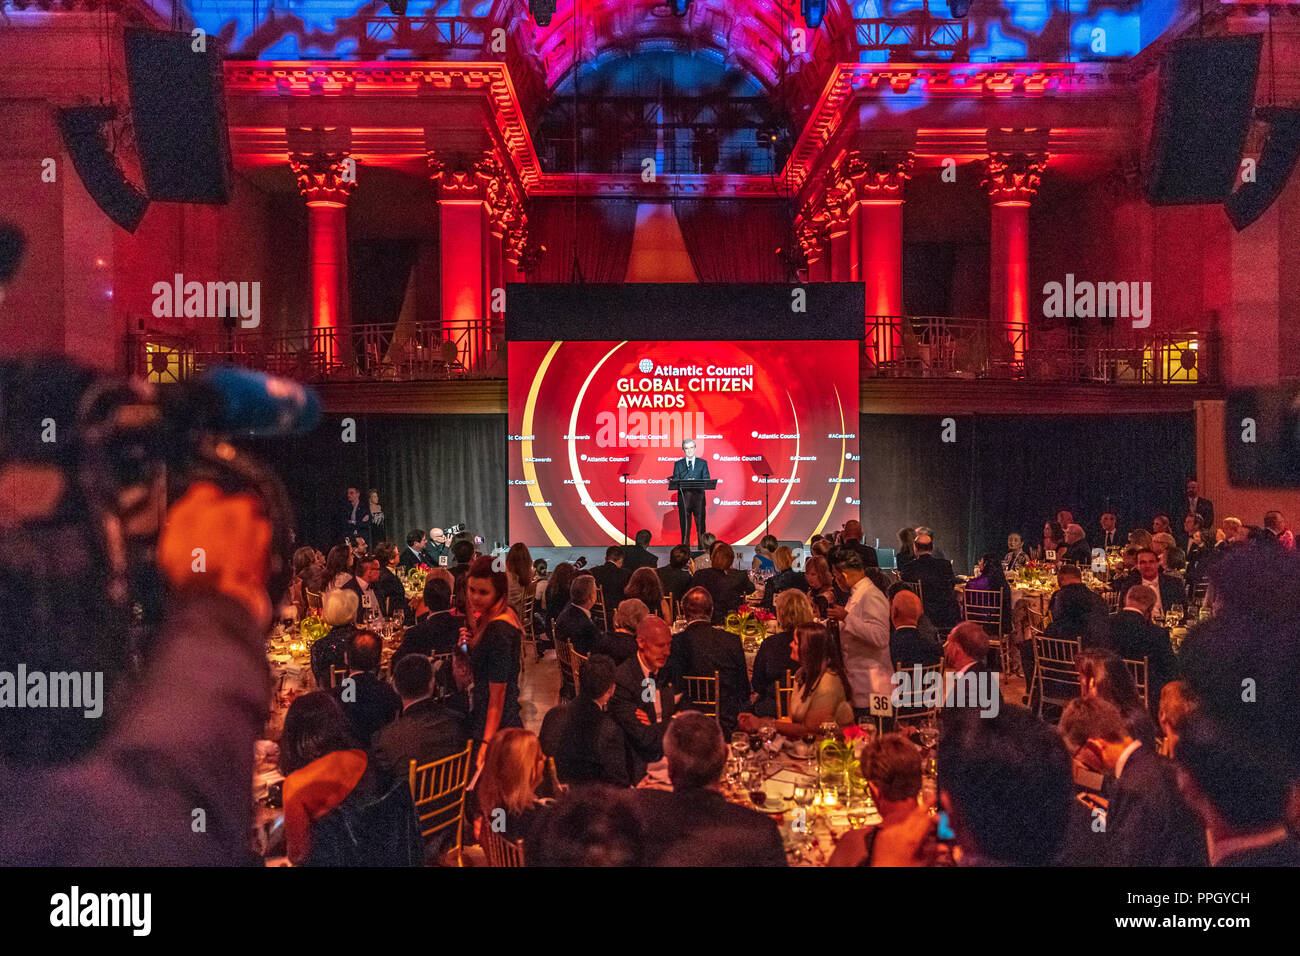 New York, USA, 24 September 2018.  Argentine President Mauricio Macri give his acceptance speech after receiving the Atlantic Council's Global Citizen Award during a ceremony at Cipriani Wall Street in New York City.  Photo by Enrique Shore Credit: Enrique Shore/Alamy Live News Stock Photo